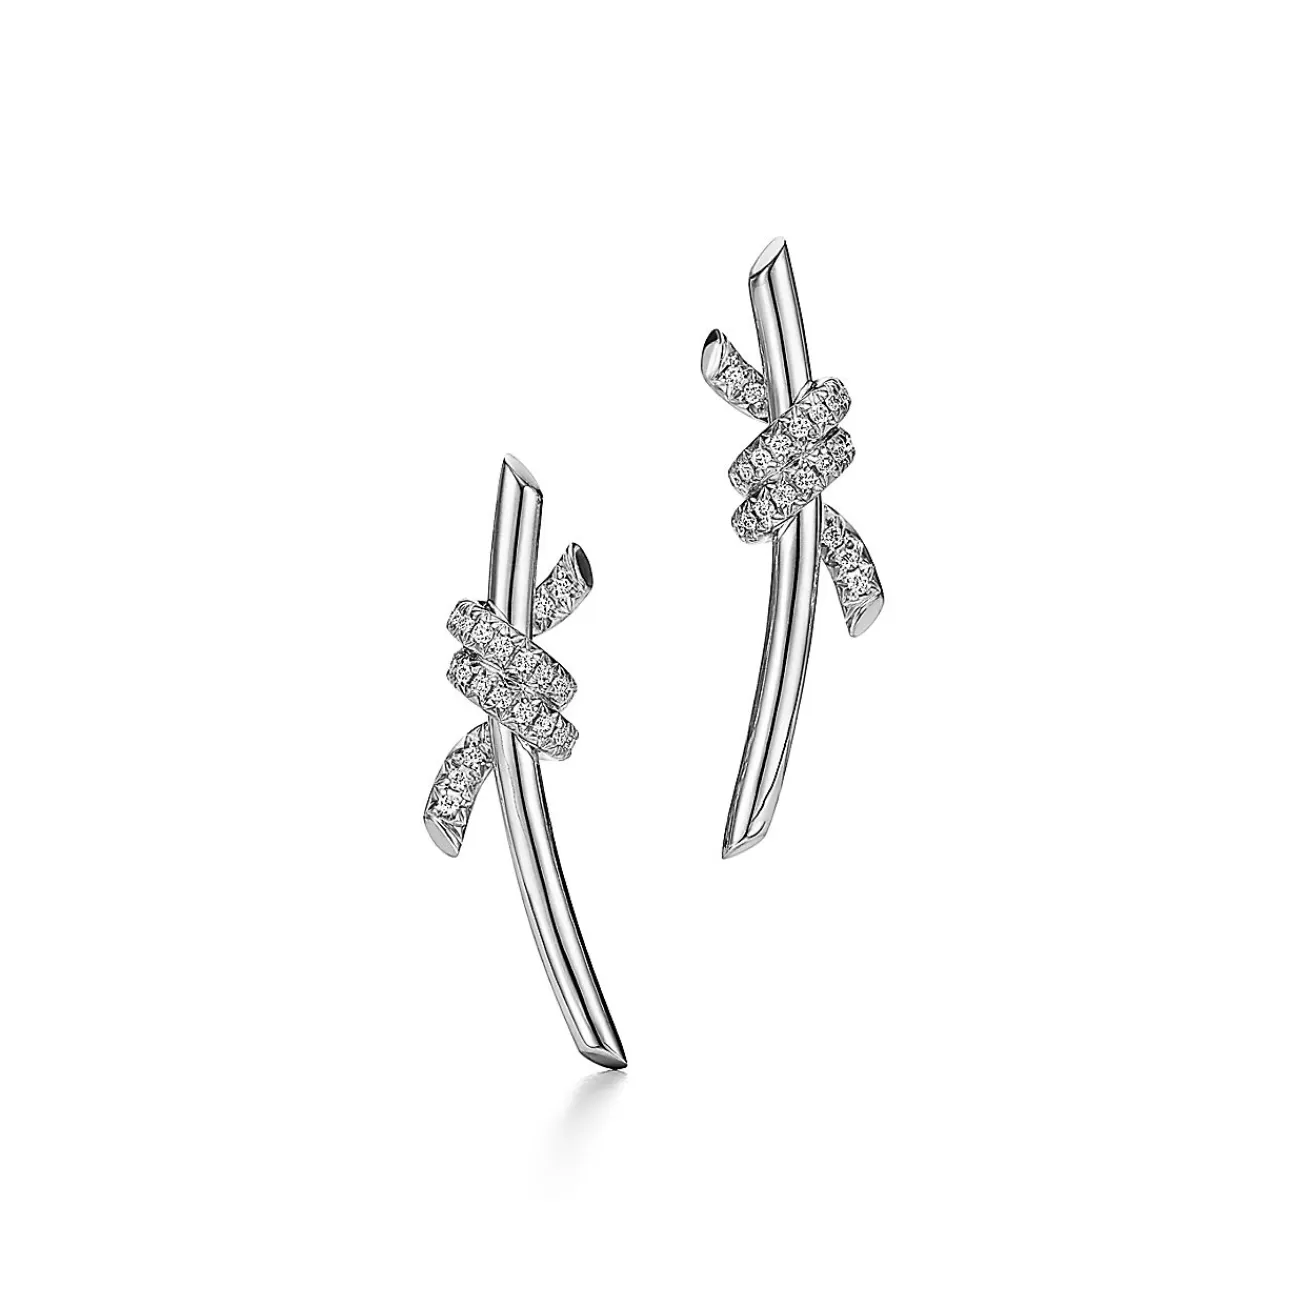 Tiffany & Co. Tiffany Knot Earrings in White Gold with Diamonds | ^ Earrings | Gifts for Her